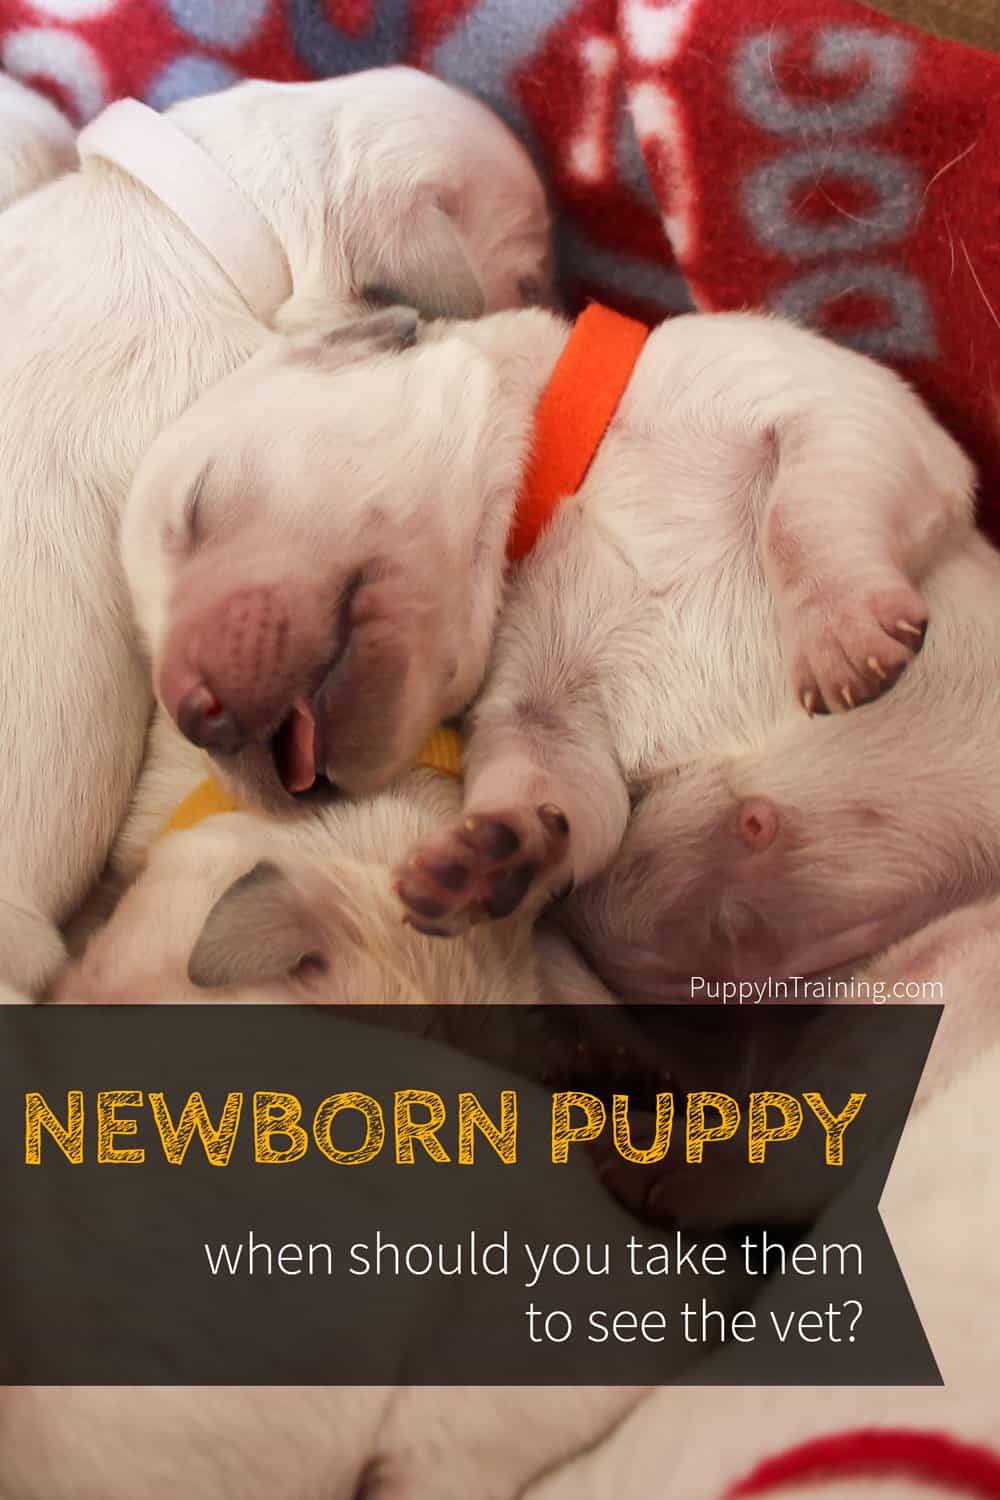 When Do You Take A Newborn Puppy To The Vet?